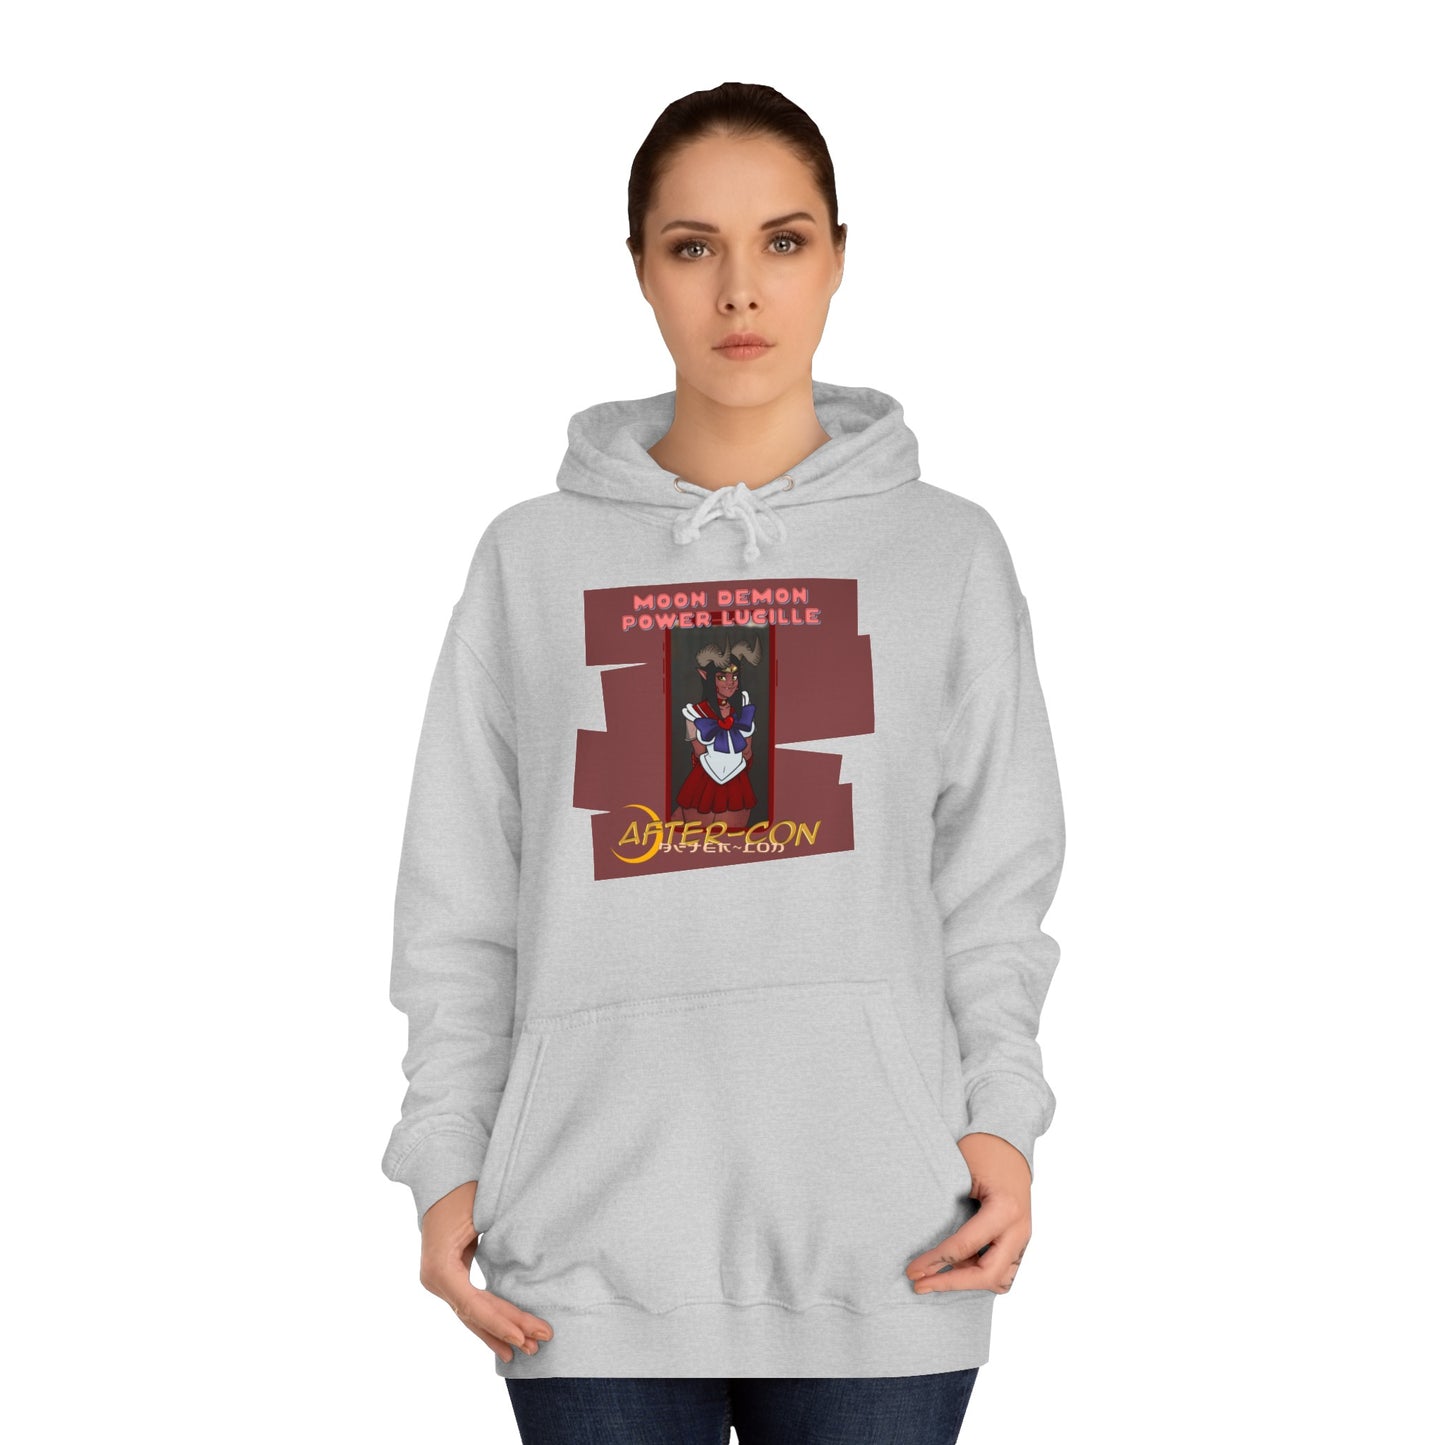 After-con "Moon Demon Power Lucille" Unisex College Hoodie